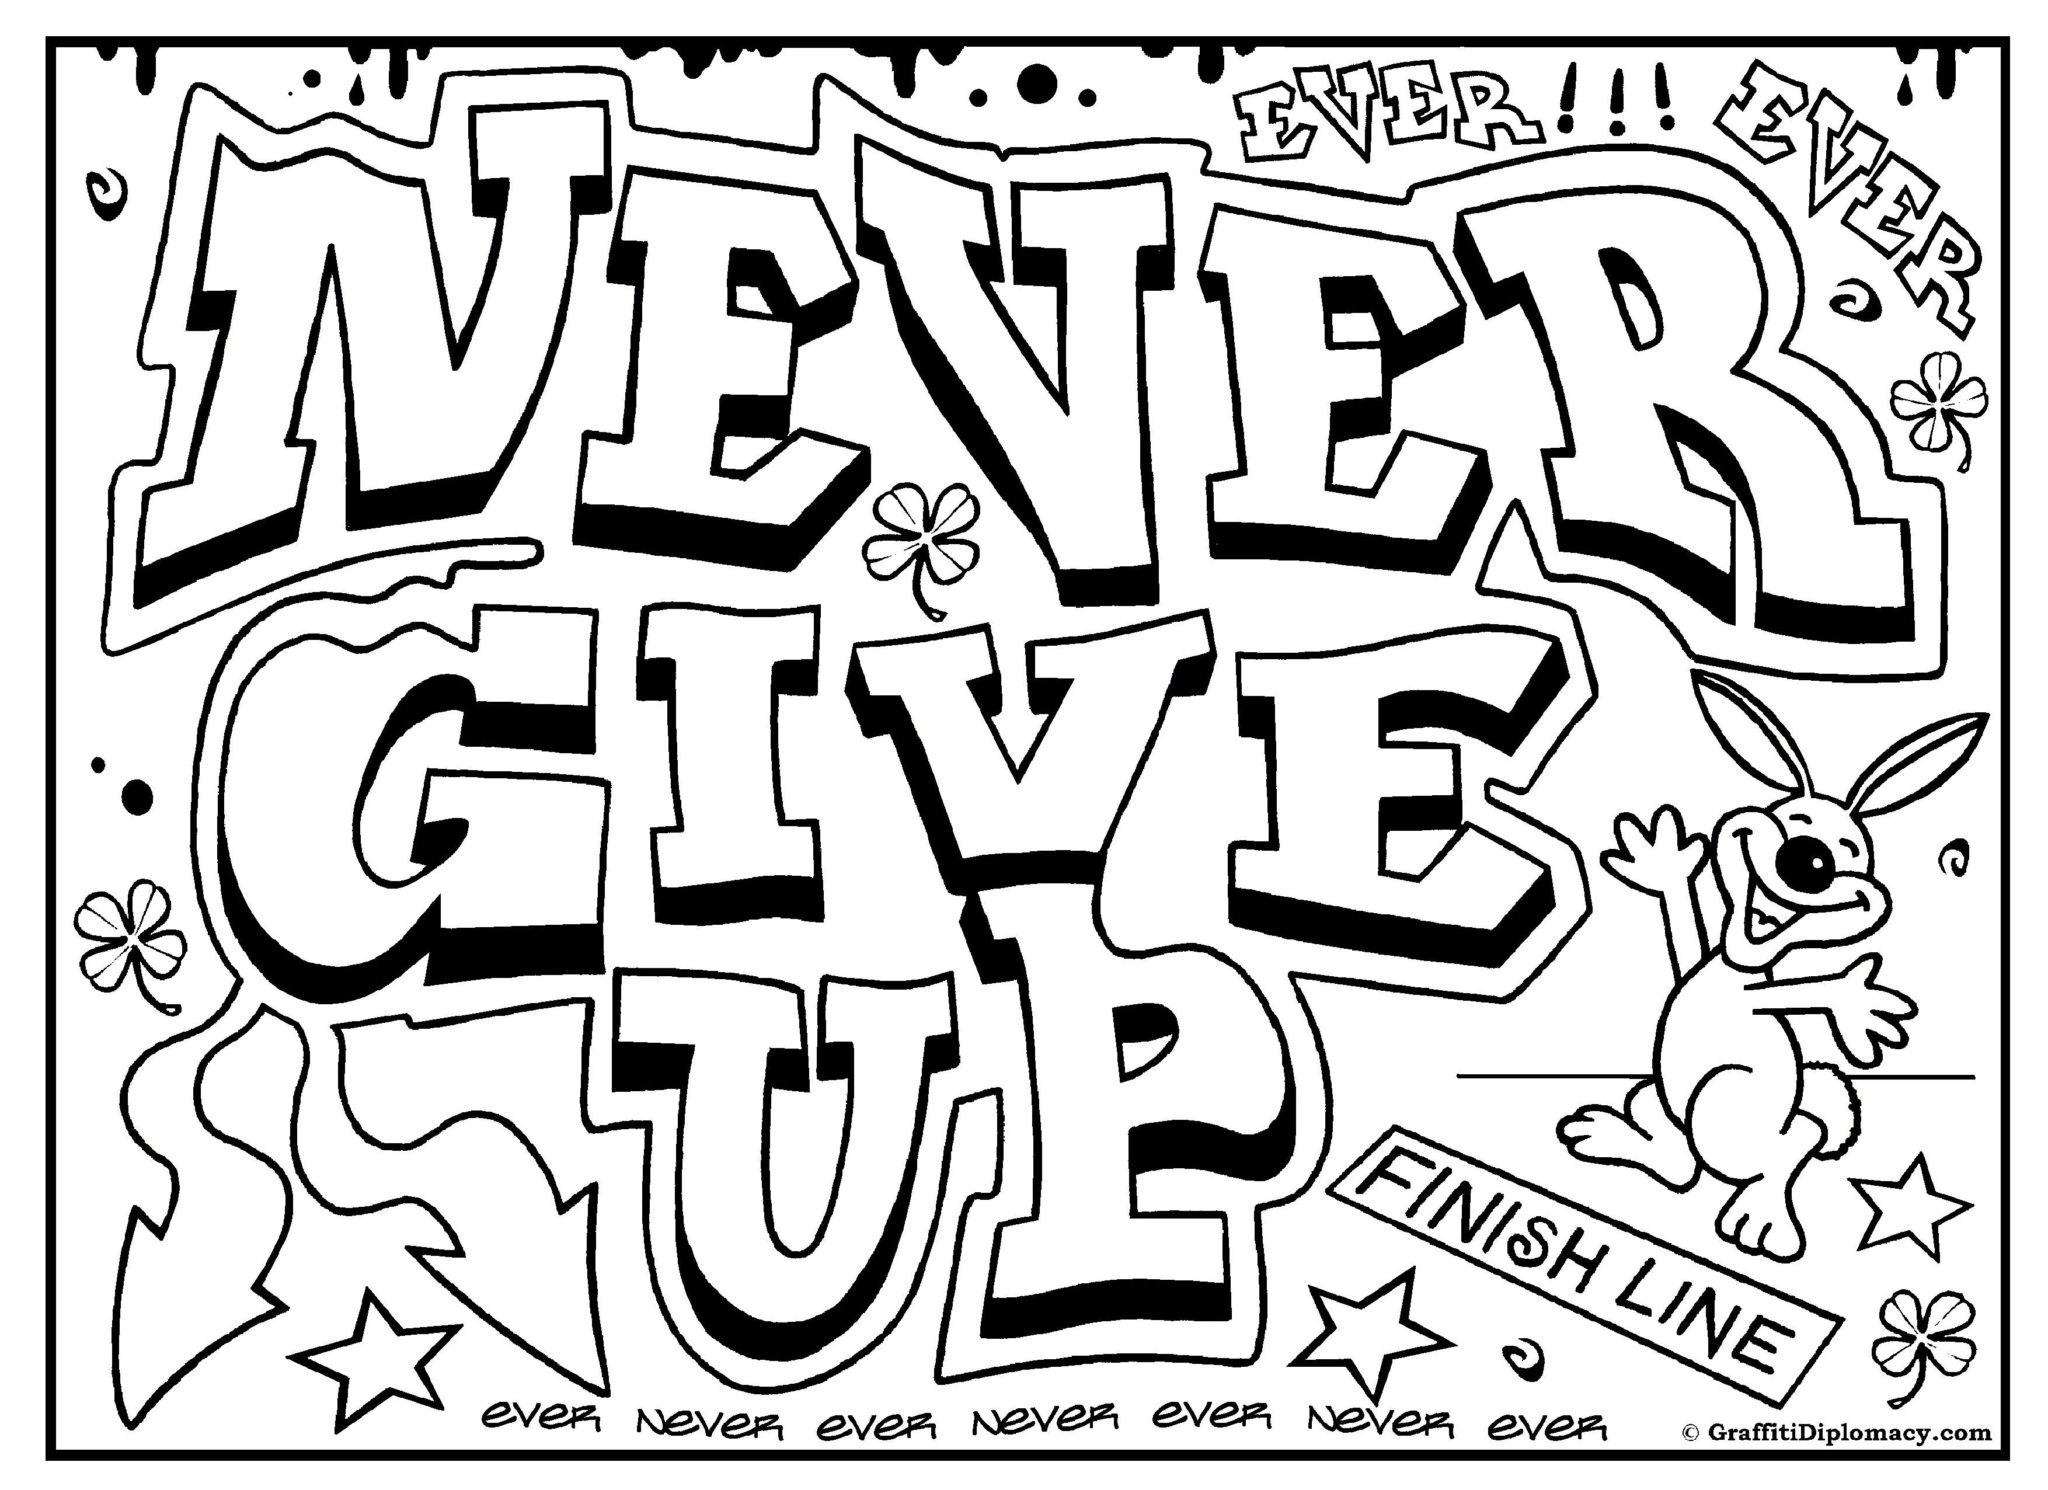 coloring pages for adults | easy coloring pages | motivational coloring pages for kids